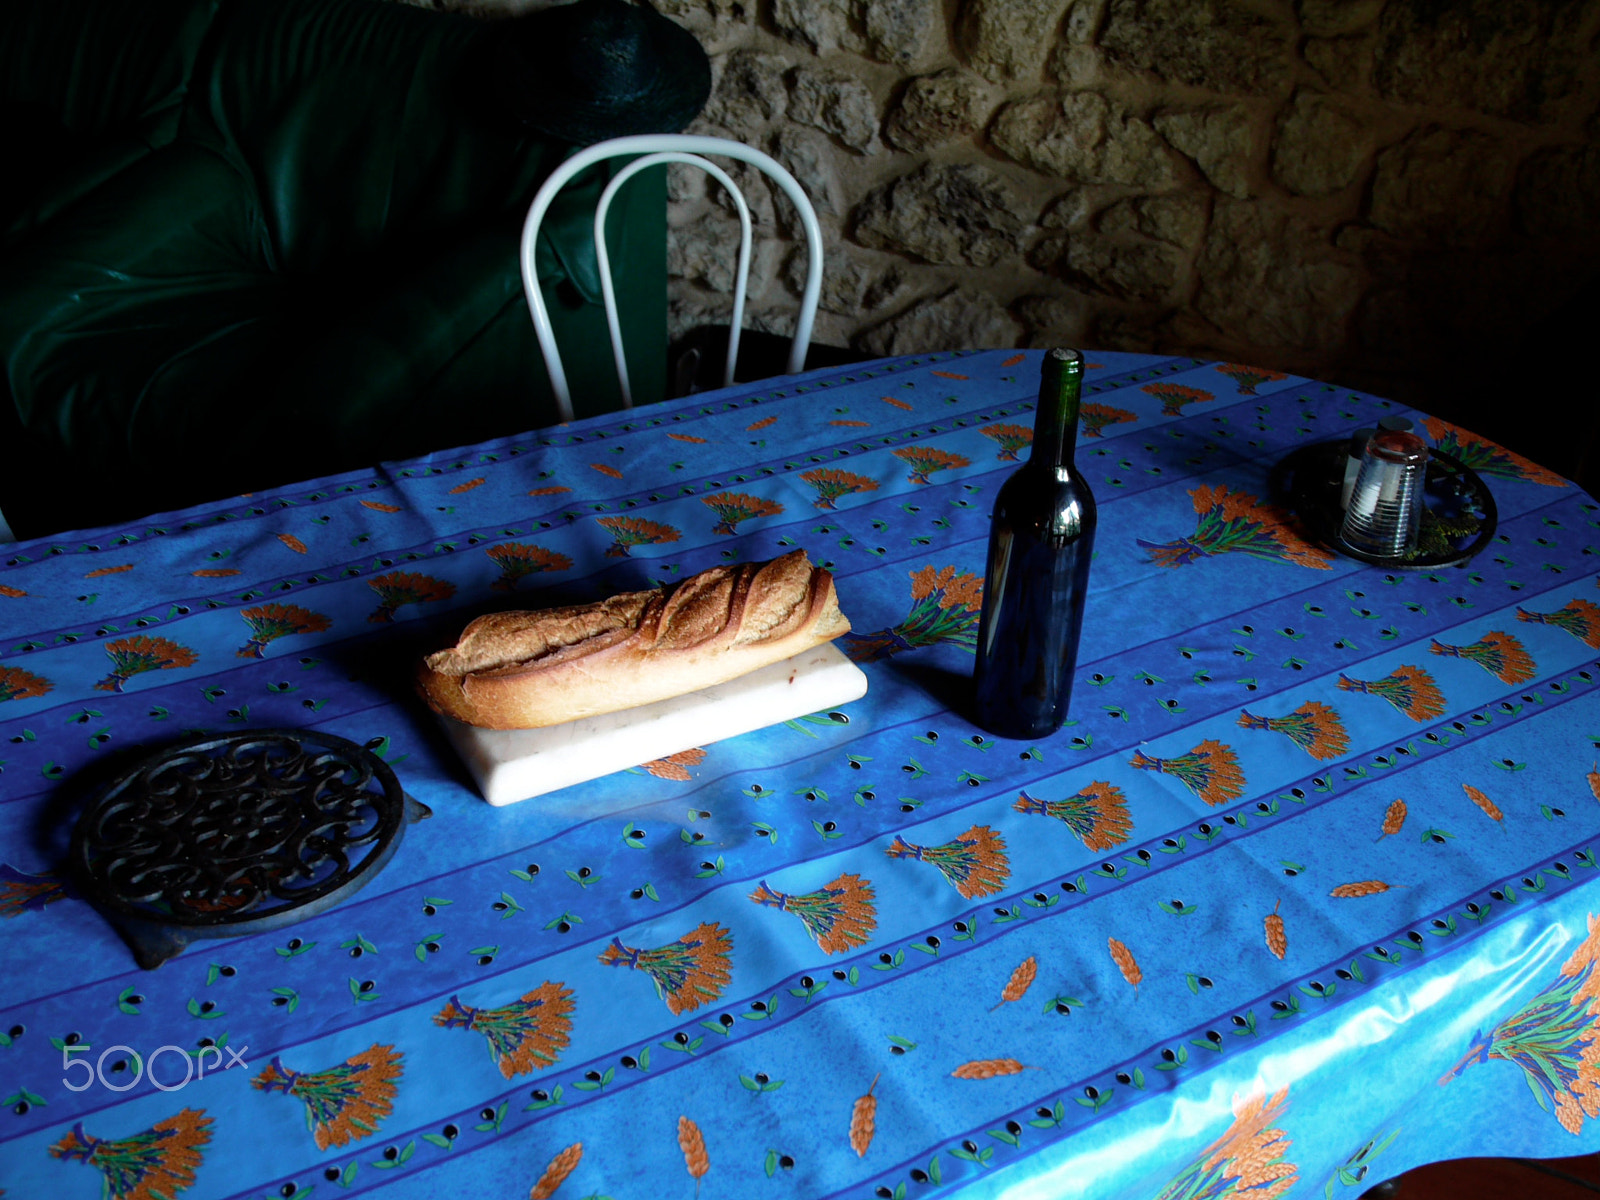 Leica Digilux 3 sample photo. Bread and wine photography